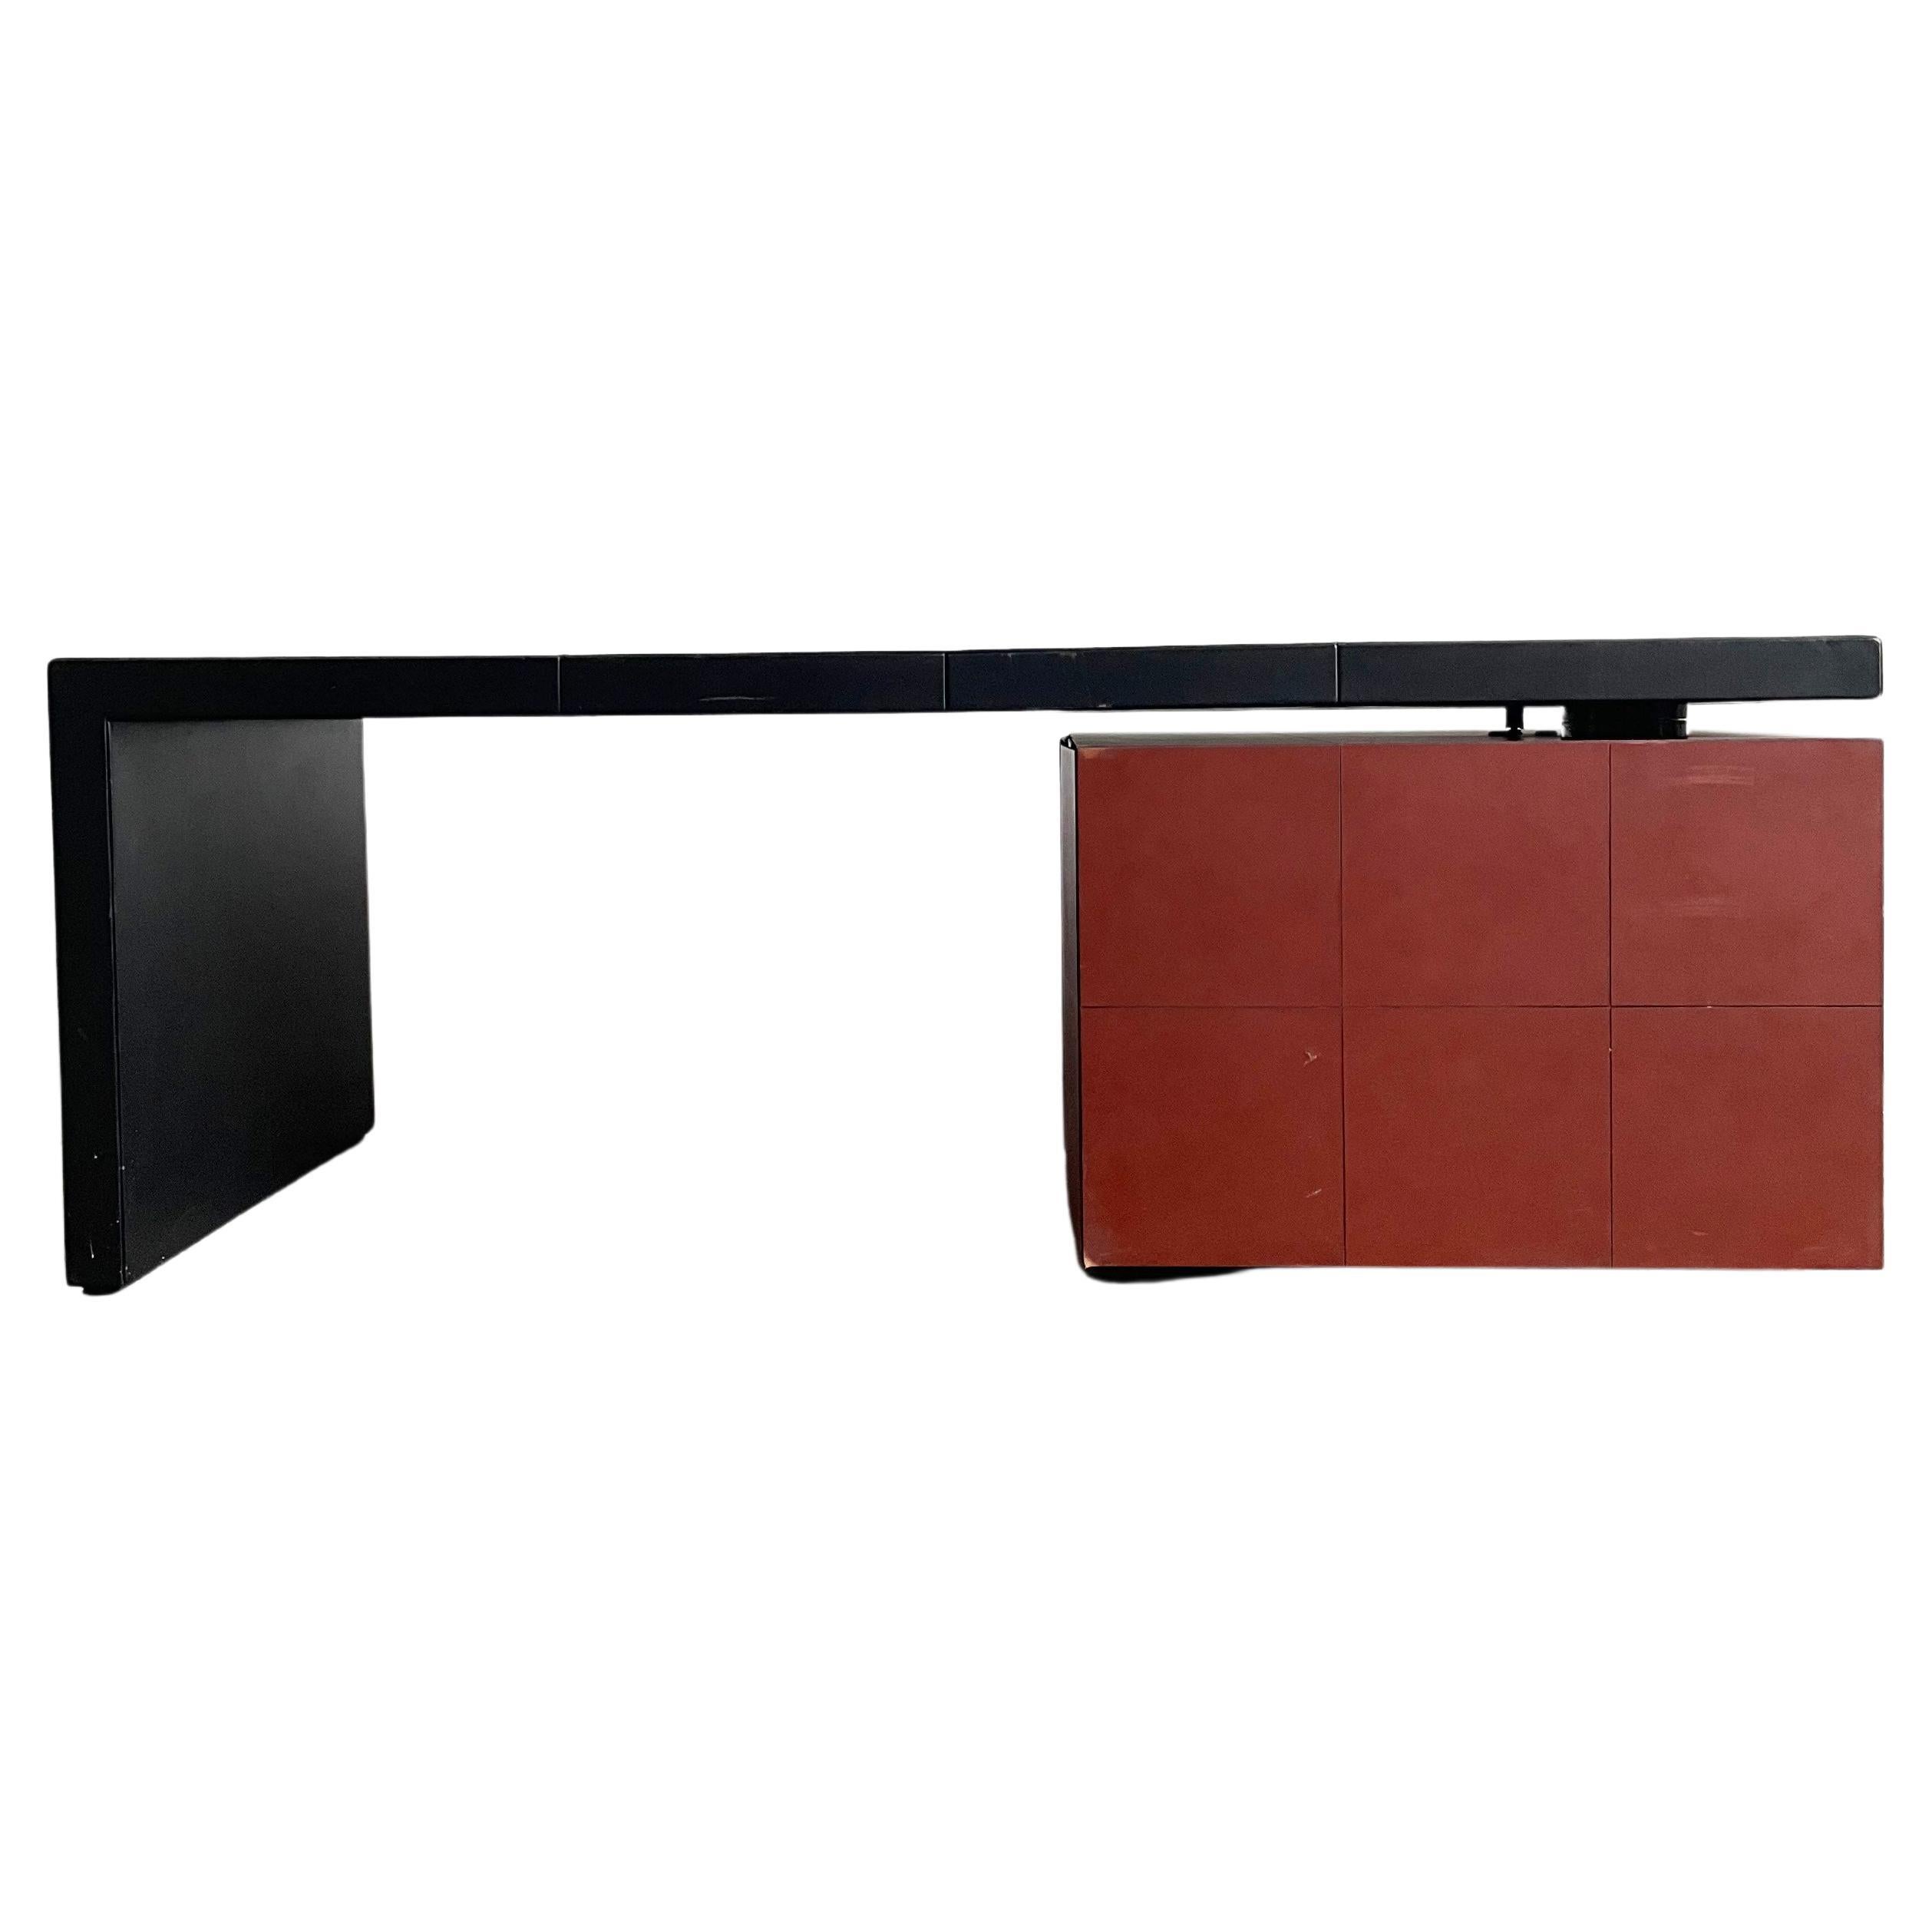 Highly exclusive CEO cube desk in leather, designed by Lella & Massimo Vignelli for Poltrona Frau, Italy late 90s/00s
The price of the new desk was around 12000 Euros

Poltrona Frau is an Italian brand specializing in luxury leather furniture.